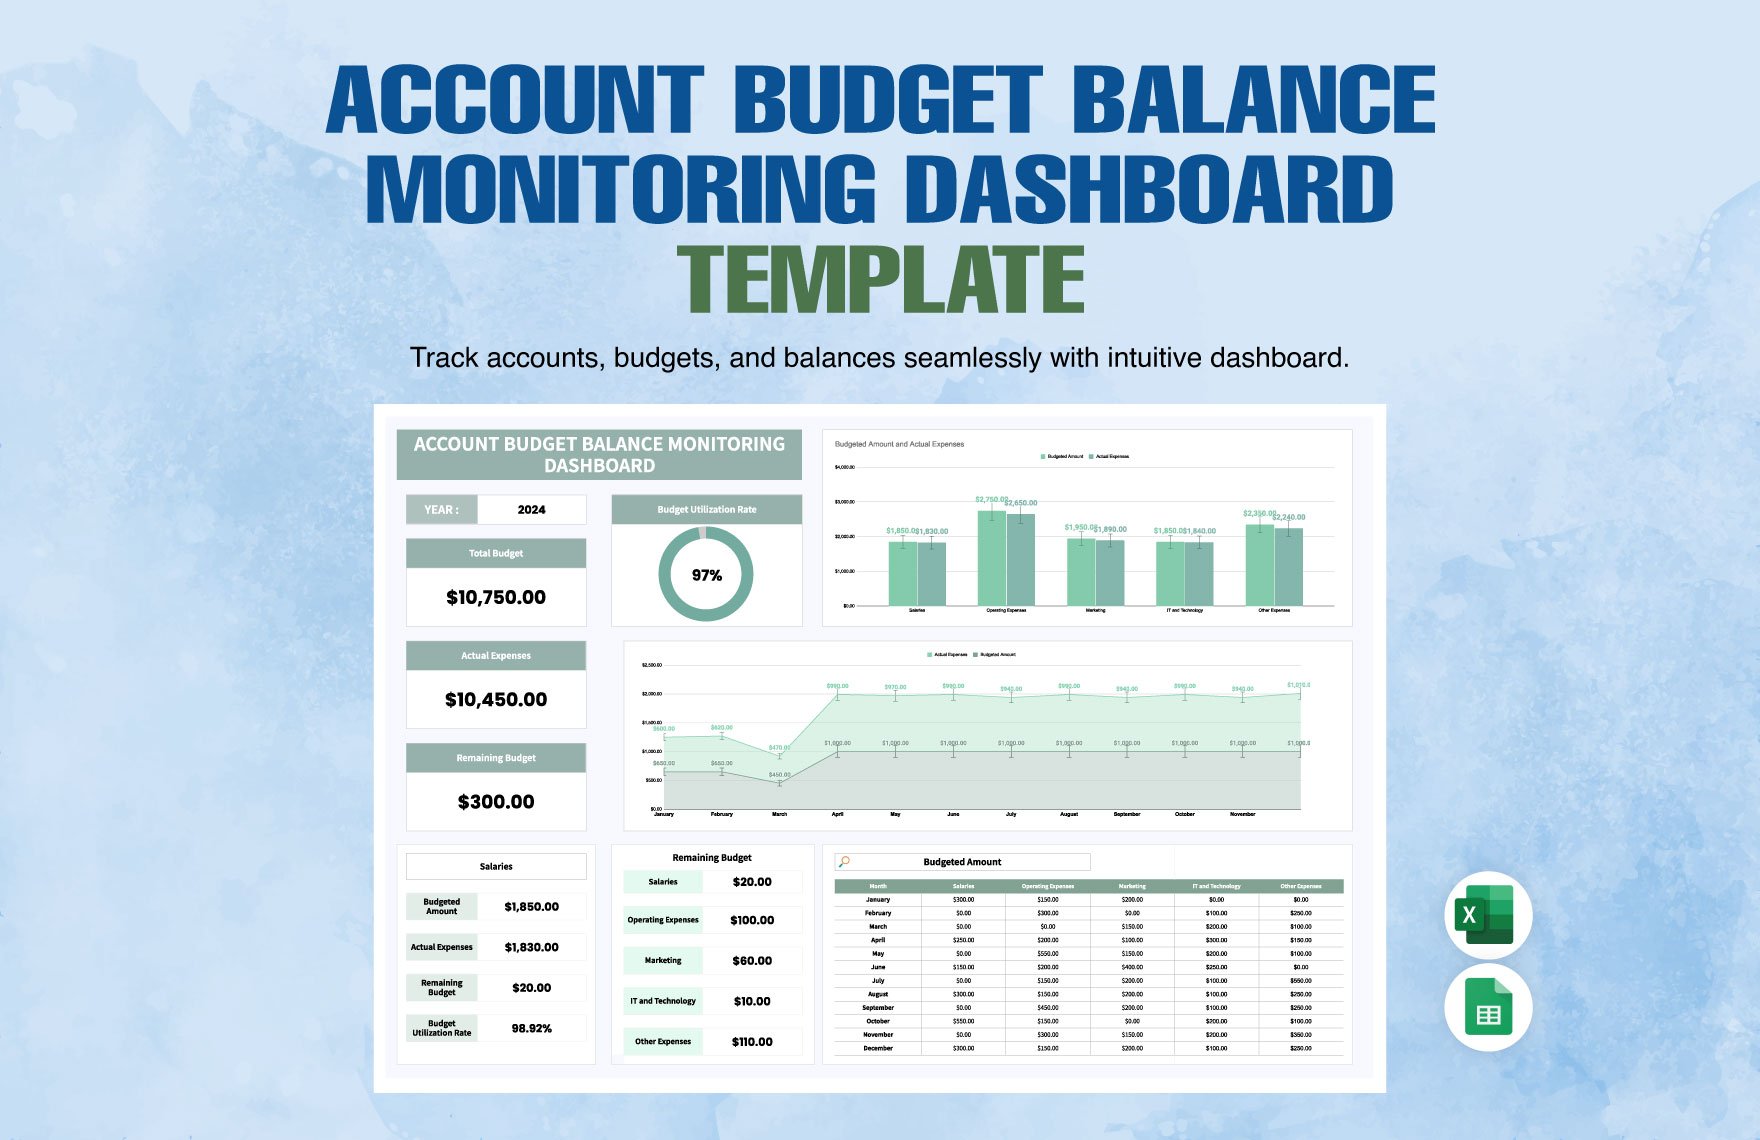 Account Budget Balance Monitoring Dashboard Template in Excel, Google Sheets